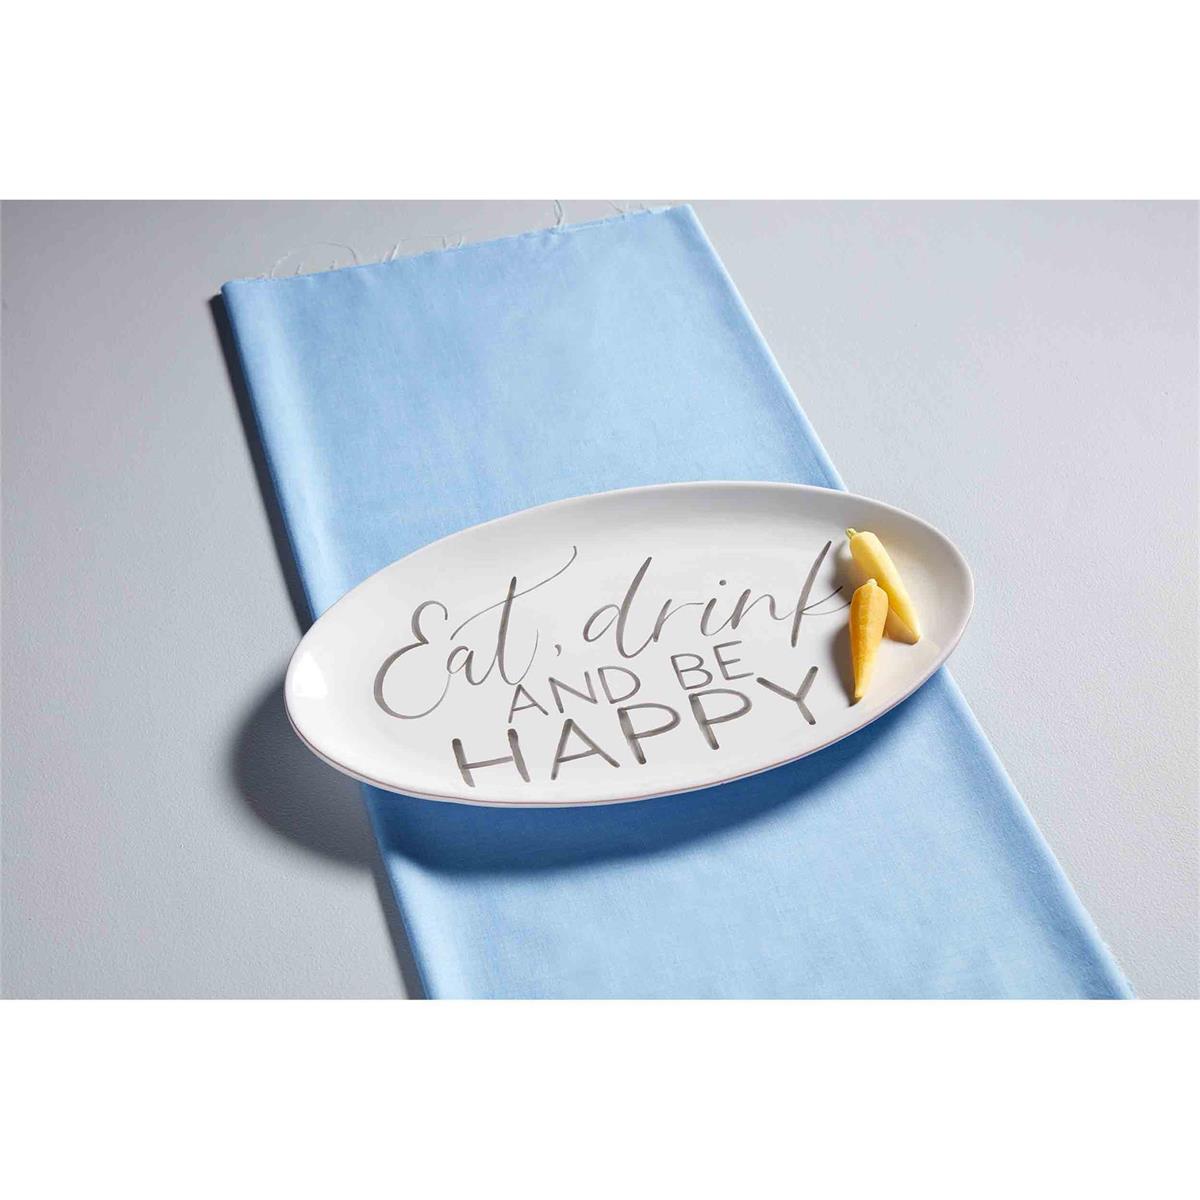 eat drink and be happy platter displayed on a light blue towel with two yellow peppers resting on it